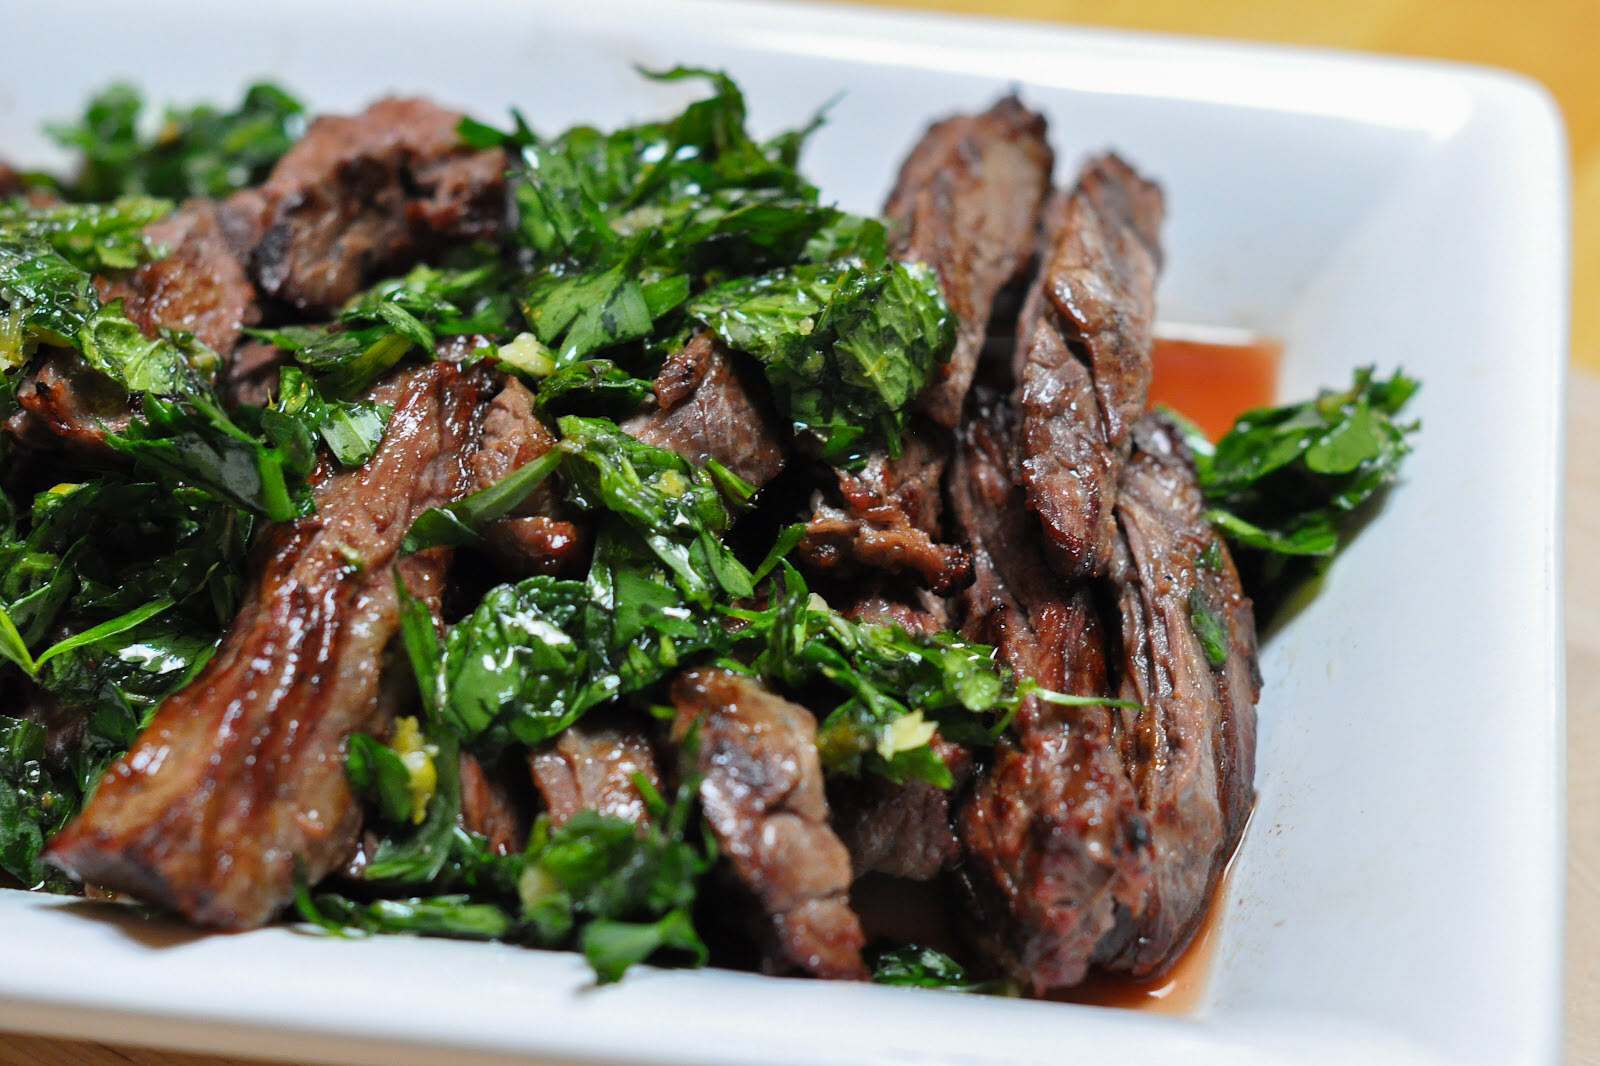 Grilled Skirt Steak with Herb Salsa Verde aphrodisiac foods for valentine's day